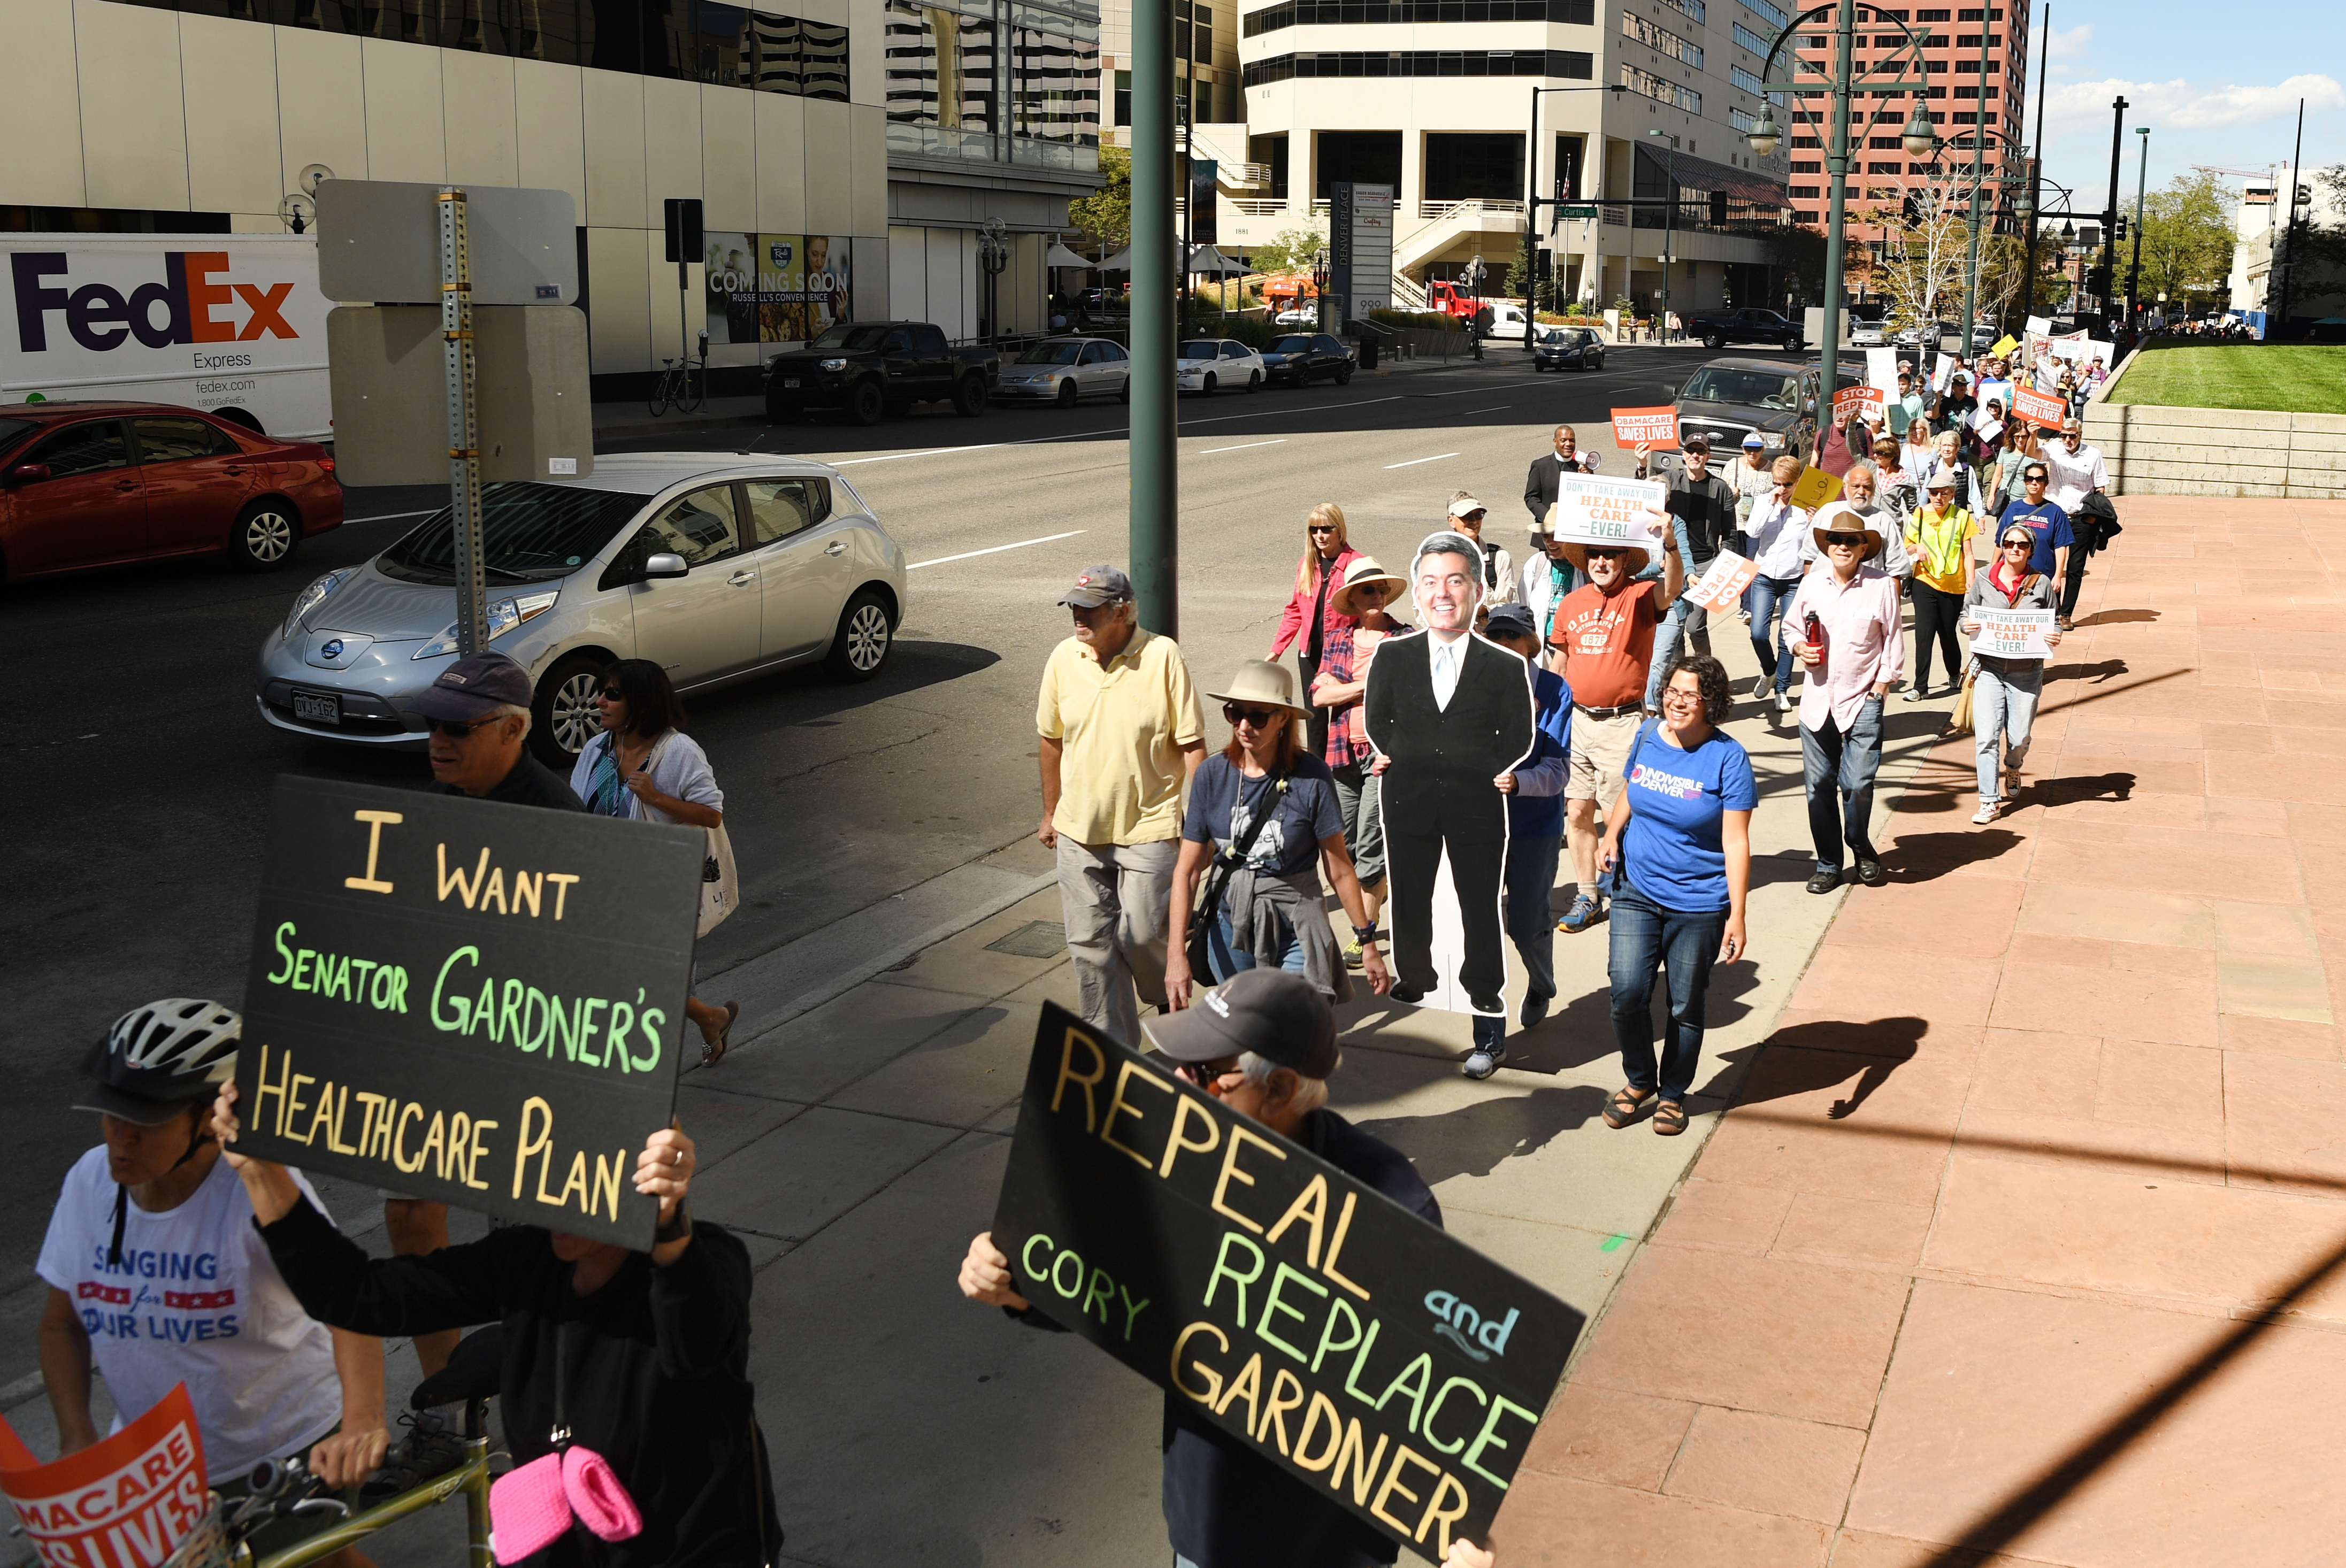 Several groups rally and march to U.S. Sen. Cory Gardner's office to pressure him to reject the Graham-Cassidy health care bill on September 22, 2017 in Denver, Colorado. (RJ Sangosti—Denver Post via Getty Images)